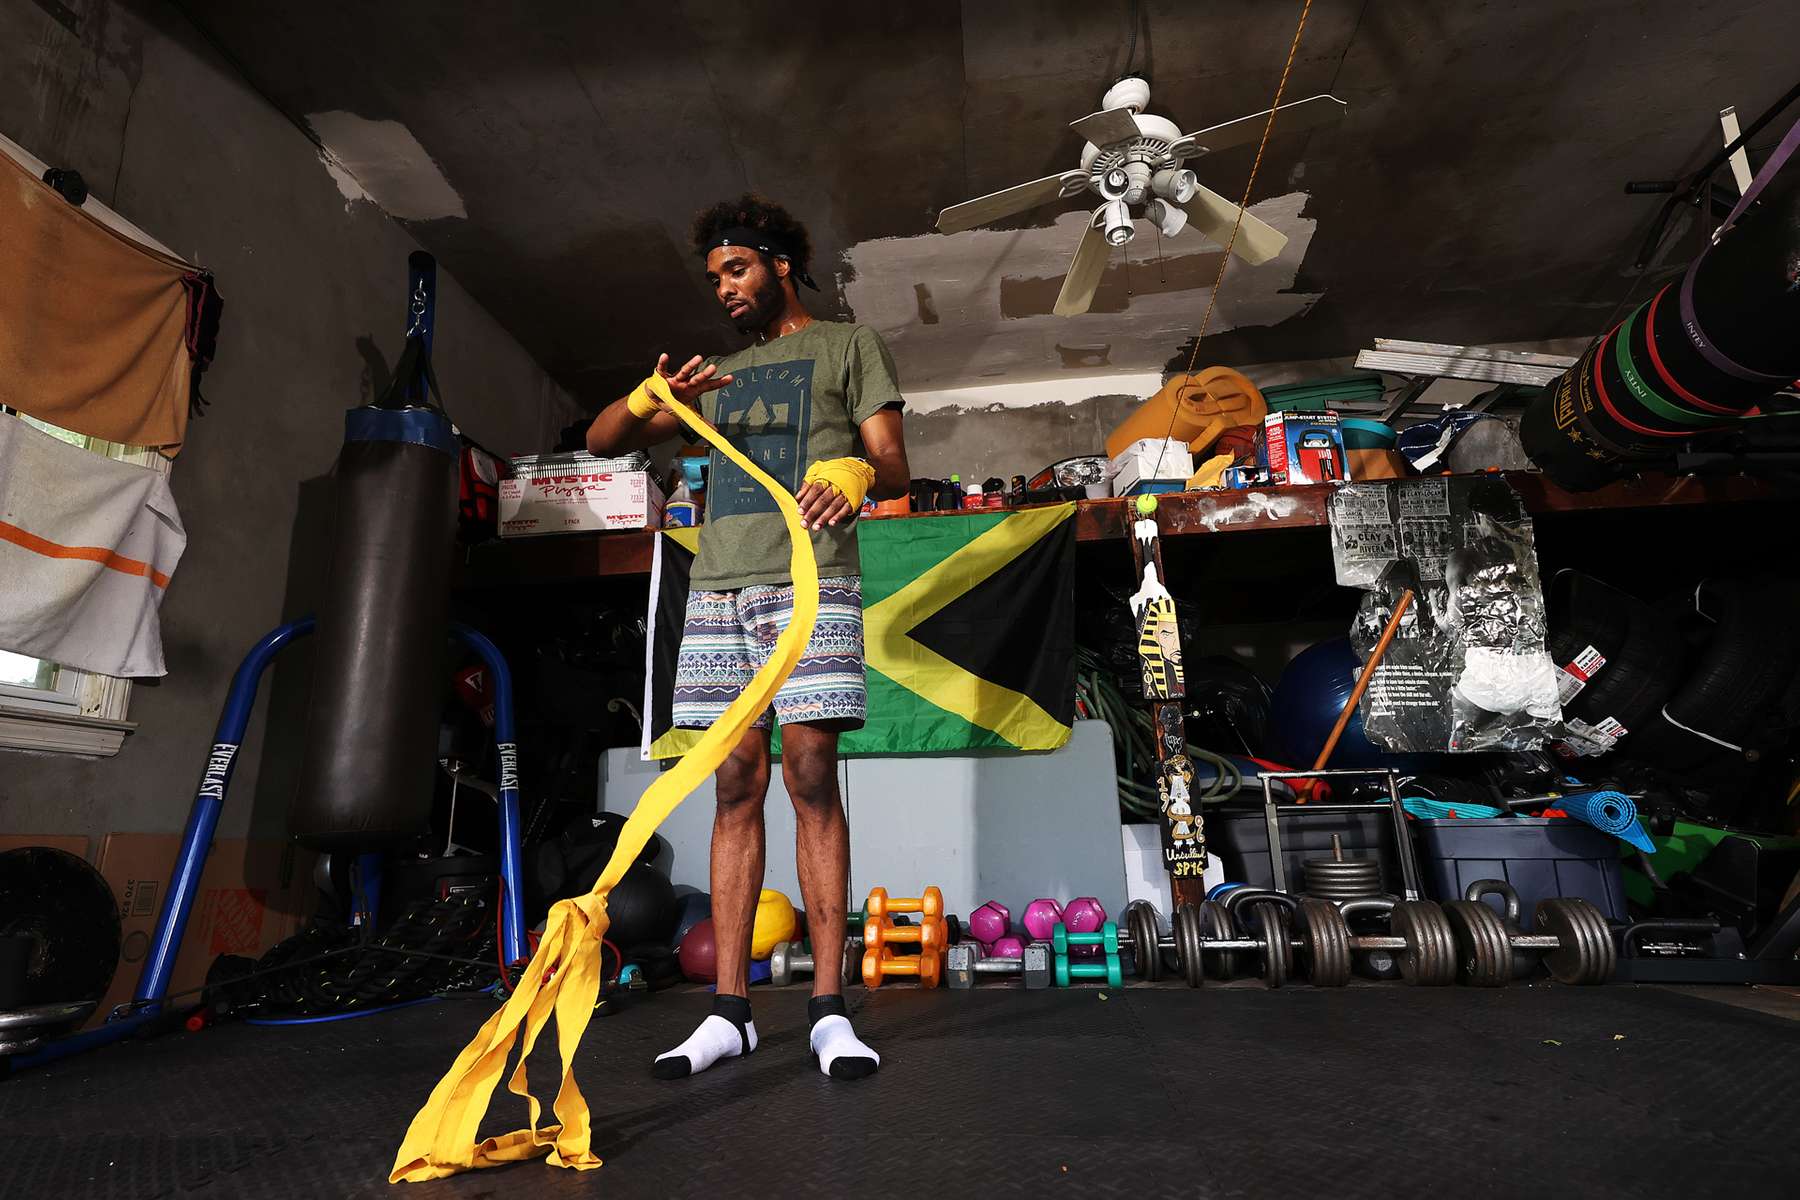 Khamall Dunkley wraps his hands in his training partner's garage on May 20, 2020 in Freeport New York.  Khamall is an Amateur boxer who fought in the New York City Golden Gloves and made the Quarter Finals in the Novice 141lb class. He was training to compete in this year's Golden Gloves tournament in the Open Class but it has been cancelled due to the coronavirus pandemic. The Gym he fights for, the Freeport Boxing Club, has been closed since March 16th. Until gyms are deemed safe to open he will continue to stay fit by training at home with the hope that he can box again later this year. 